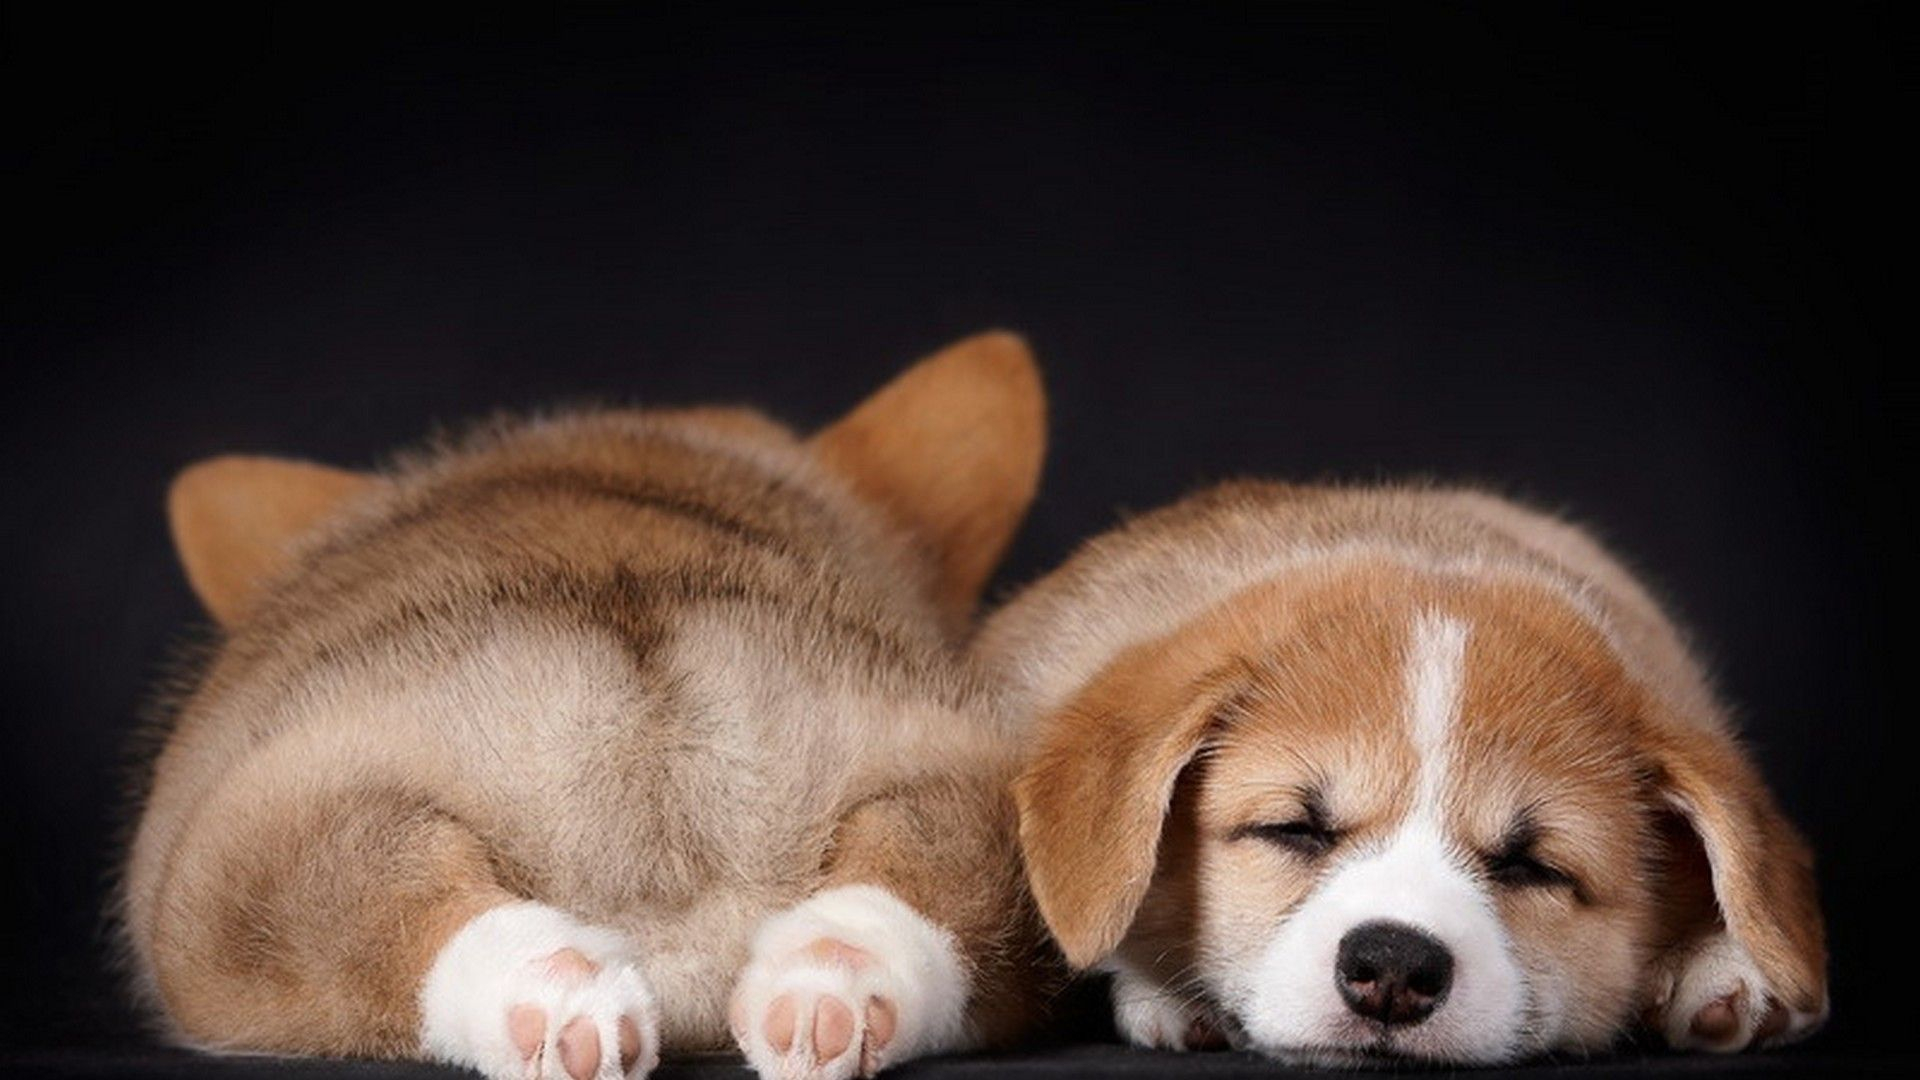 1920x1080 Pictures Of Puppies Wallpaper For Desktop | Best HD Wallpapers | Cute puppy pictures, Corgi, Sleeping puppies